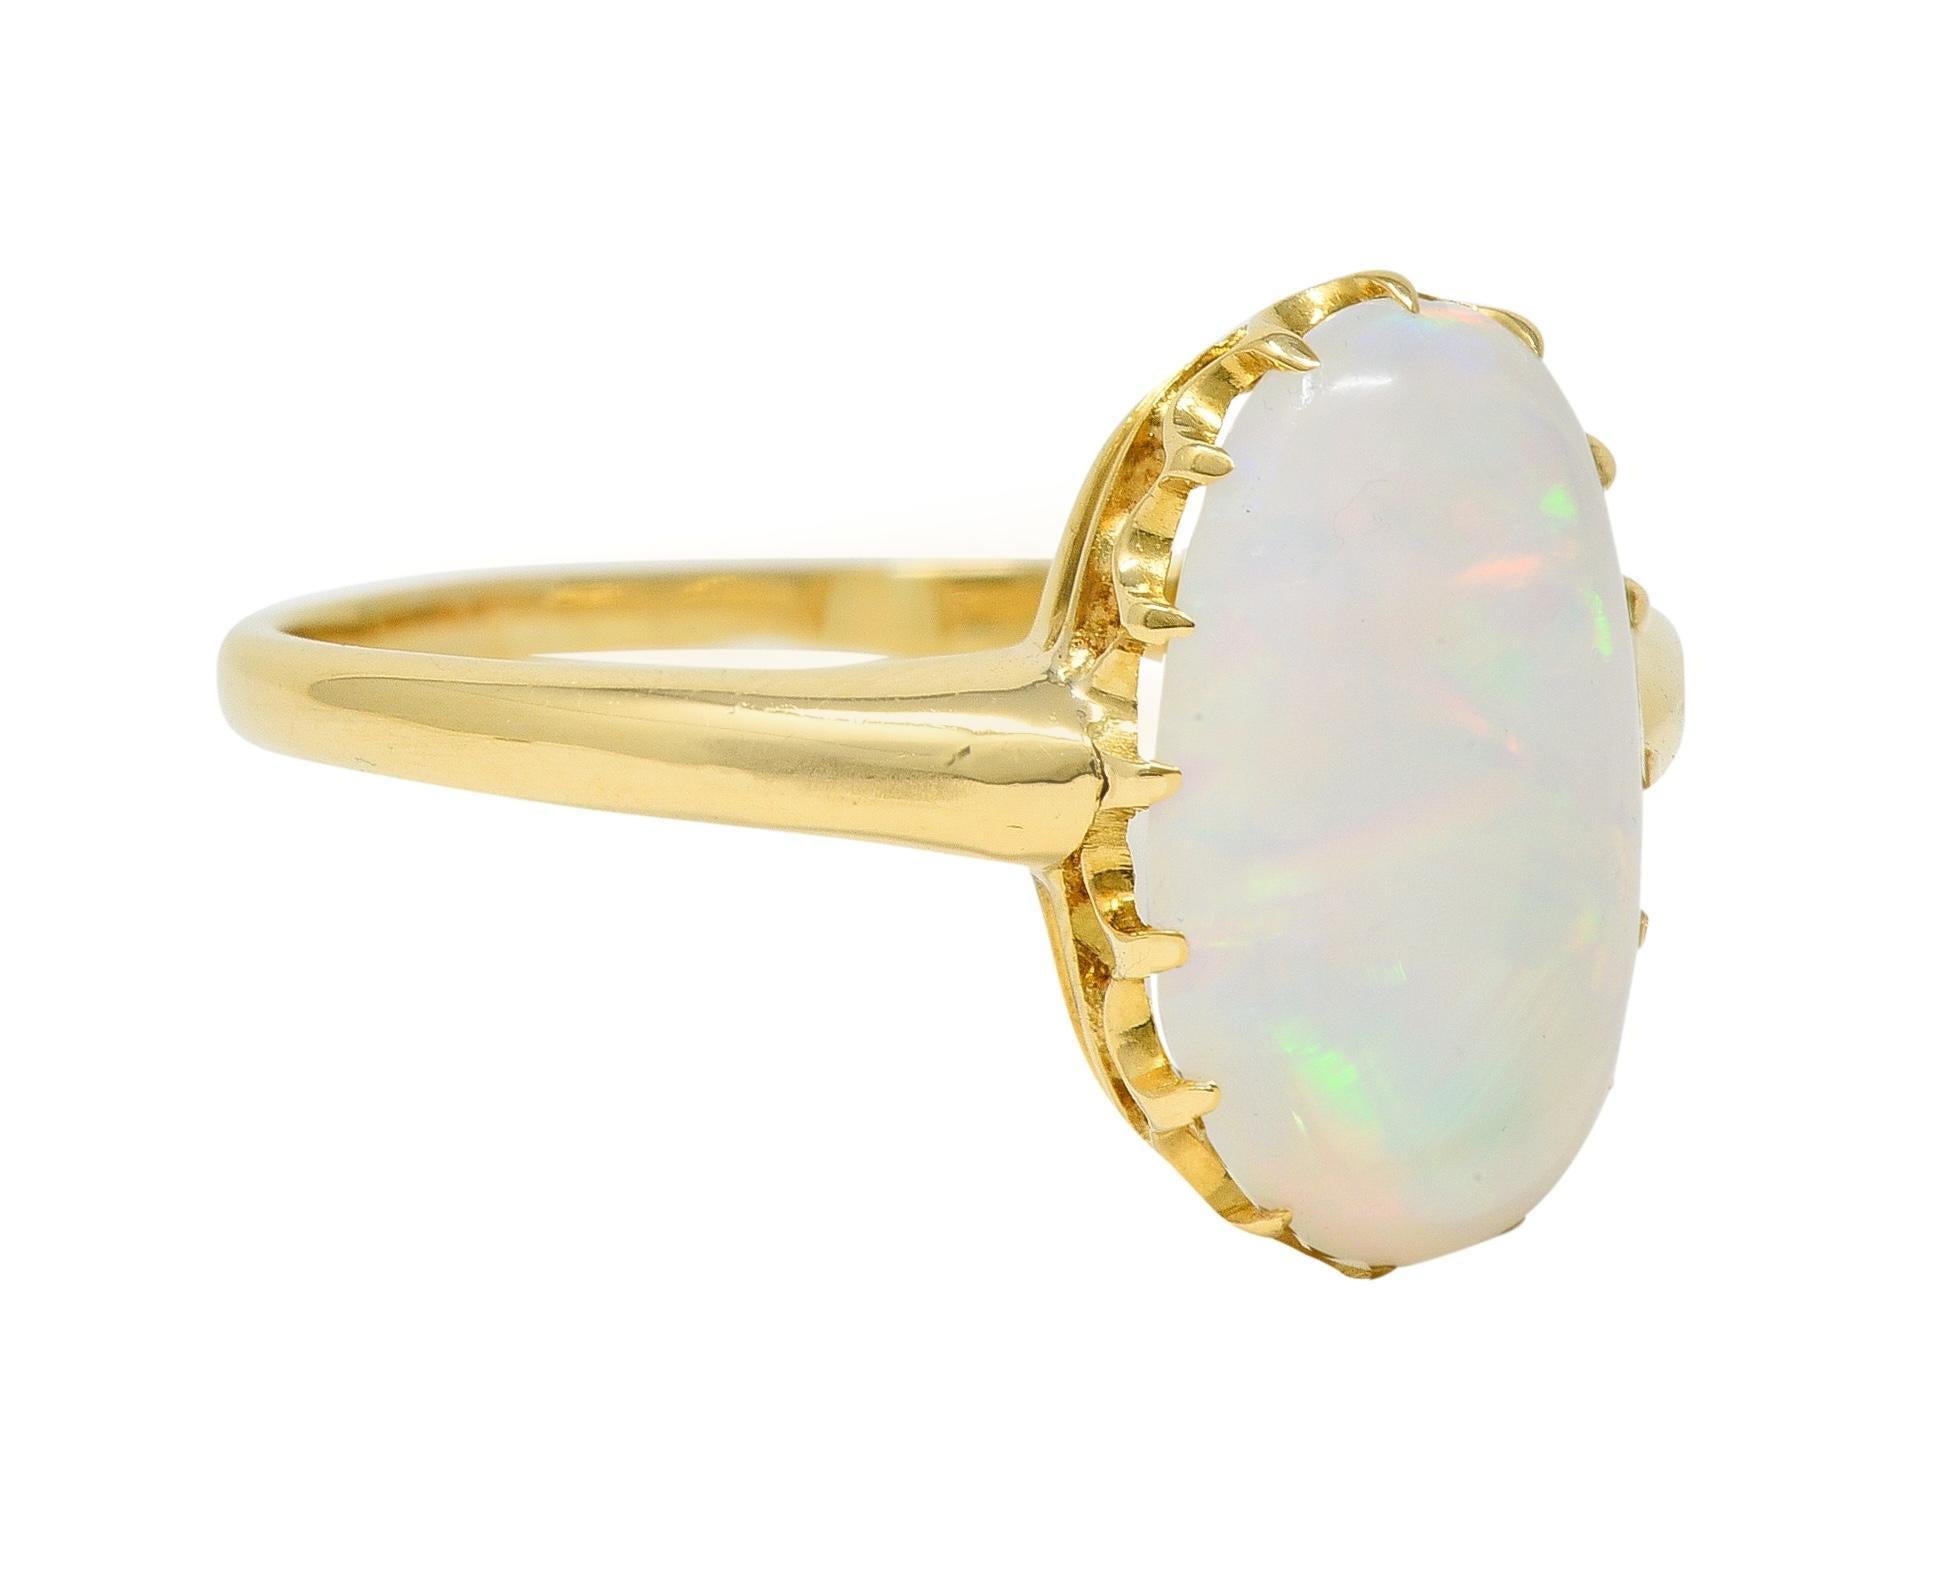 Centering an oval-shaped opal cabochon measuring 3.2 x 7.8 mm 
Translucent white in body color with strong spectral play-of-color
Set with talon prongs in a pierced gallery 
Flanked by rounded shoulders
With high polish finish
Tested as 18 karat